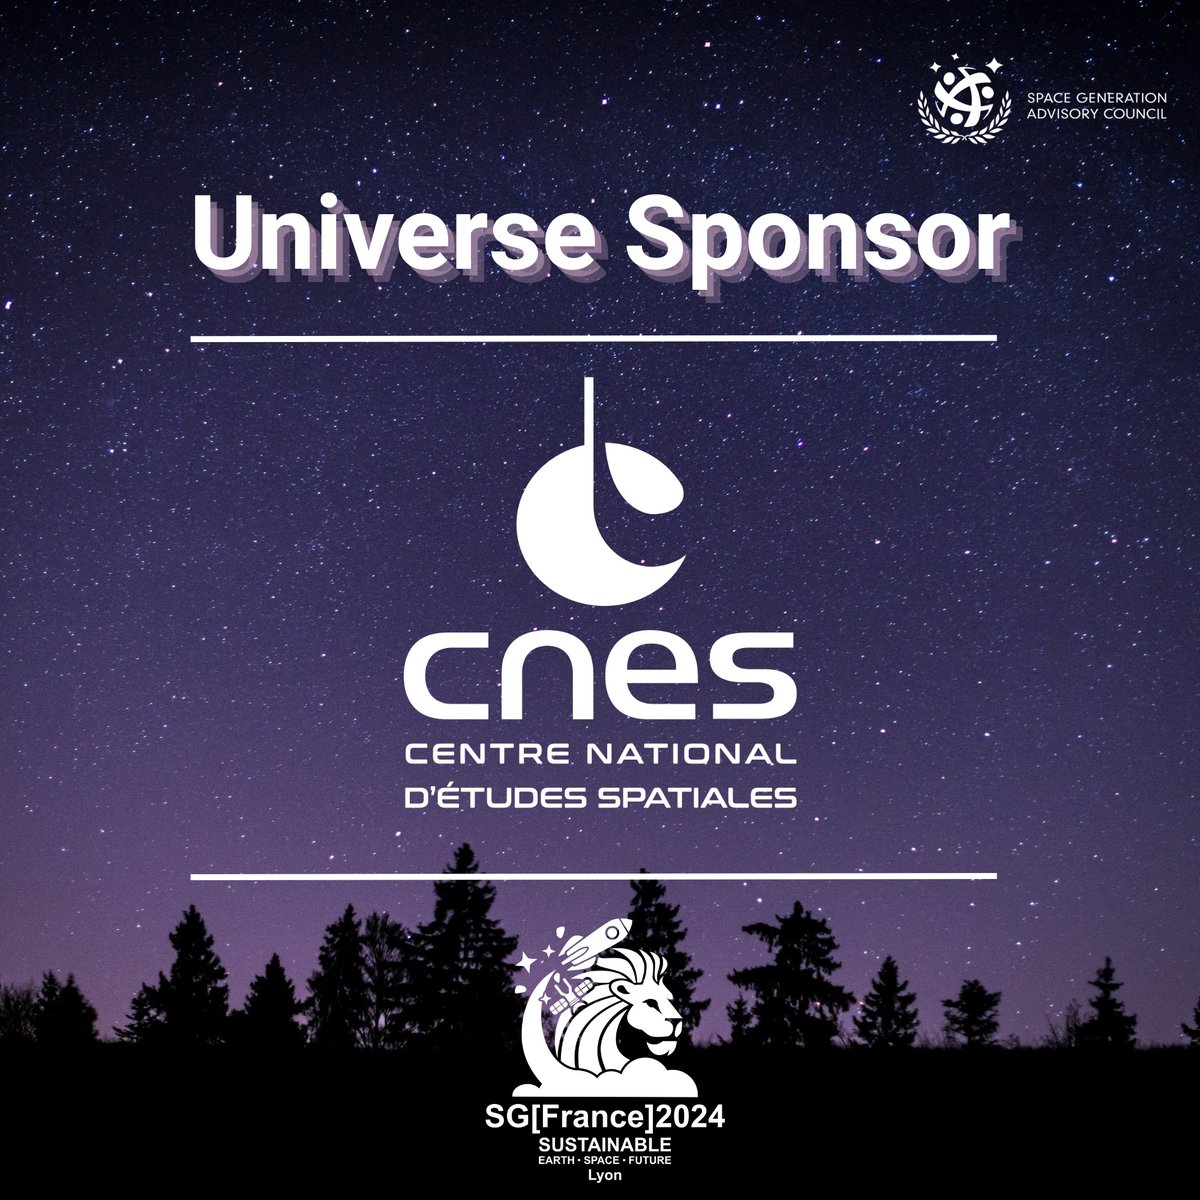 Thank you to all our sponsors! 🌠Universe sponsor: @CNES 🌌Galaxy sponsors: @esa , @CTengineers ⭐Star sponsors: Space Founders, @IPSA, @ArcsecSpace, 🪐Planet Sponsors: @AldoriaSpace, @ISUnet, @universeh_eu, @spaceavocat Thanks also to @ESME_ingenieurs for hosting us #SGFrance